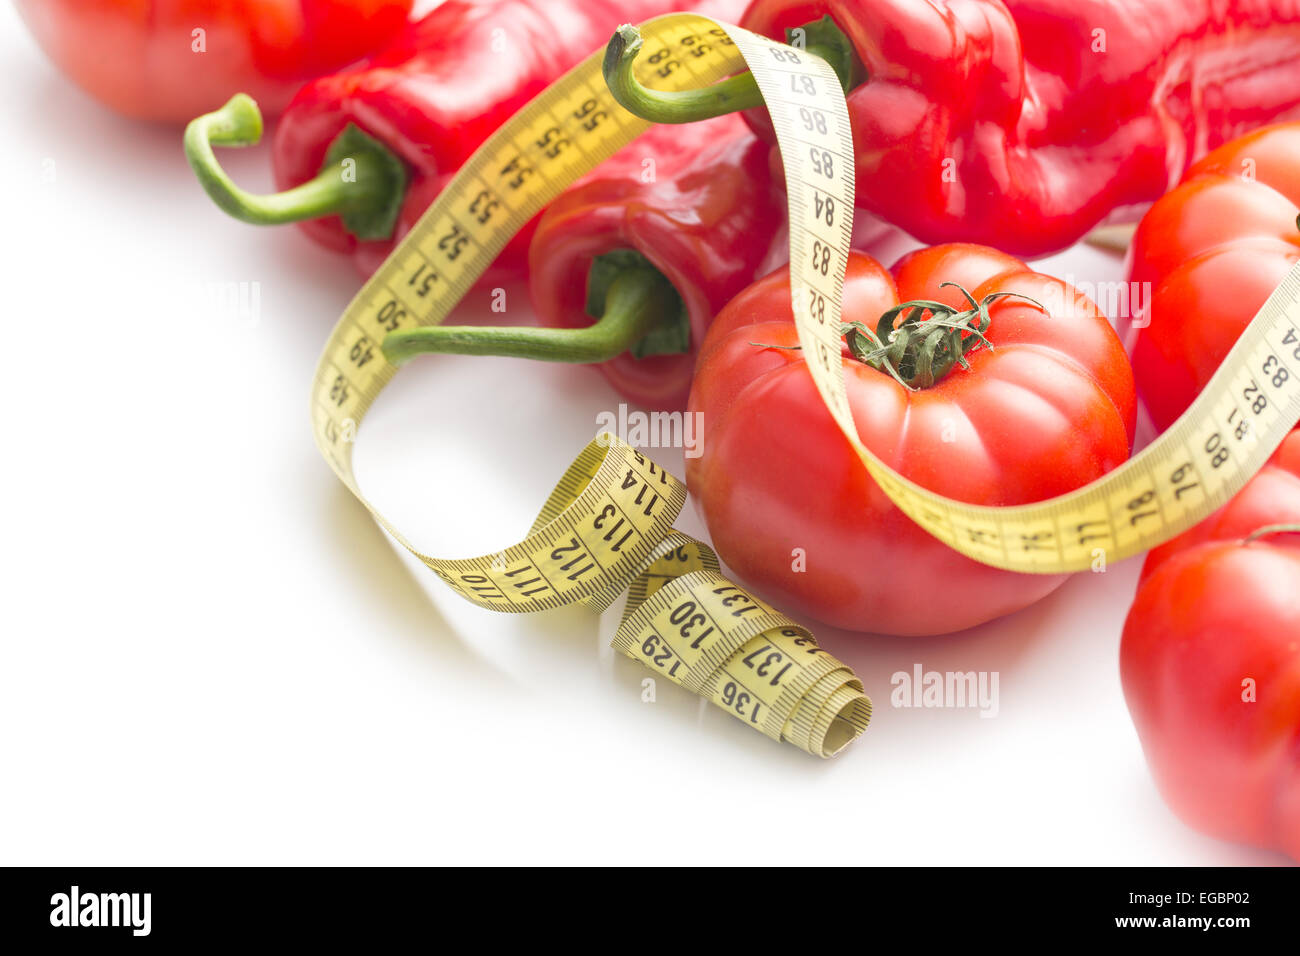 Diet concept. Peppers and tomatoes on white background. Stock Photo